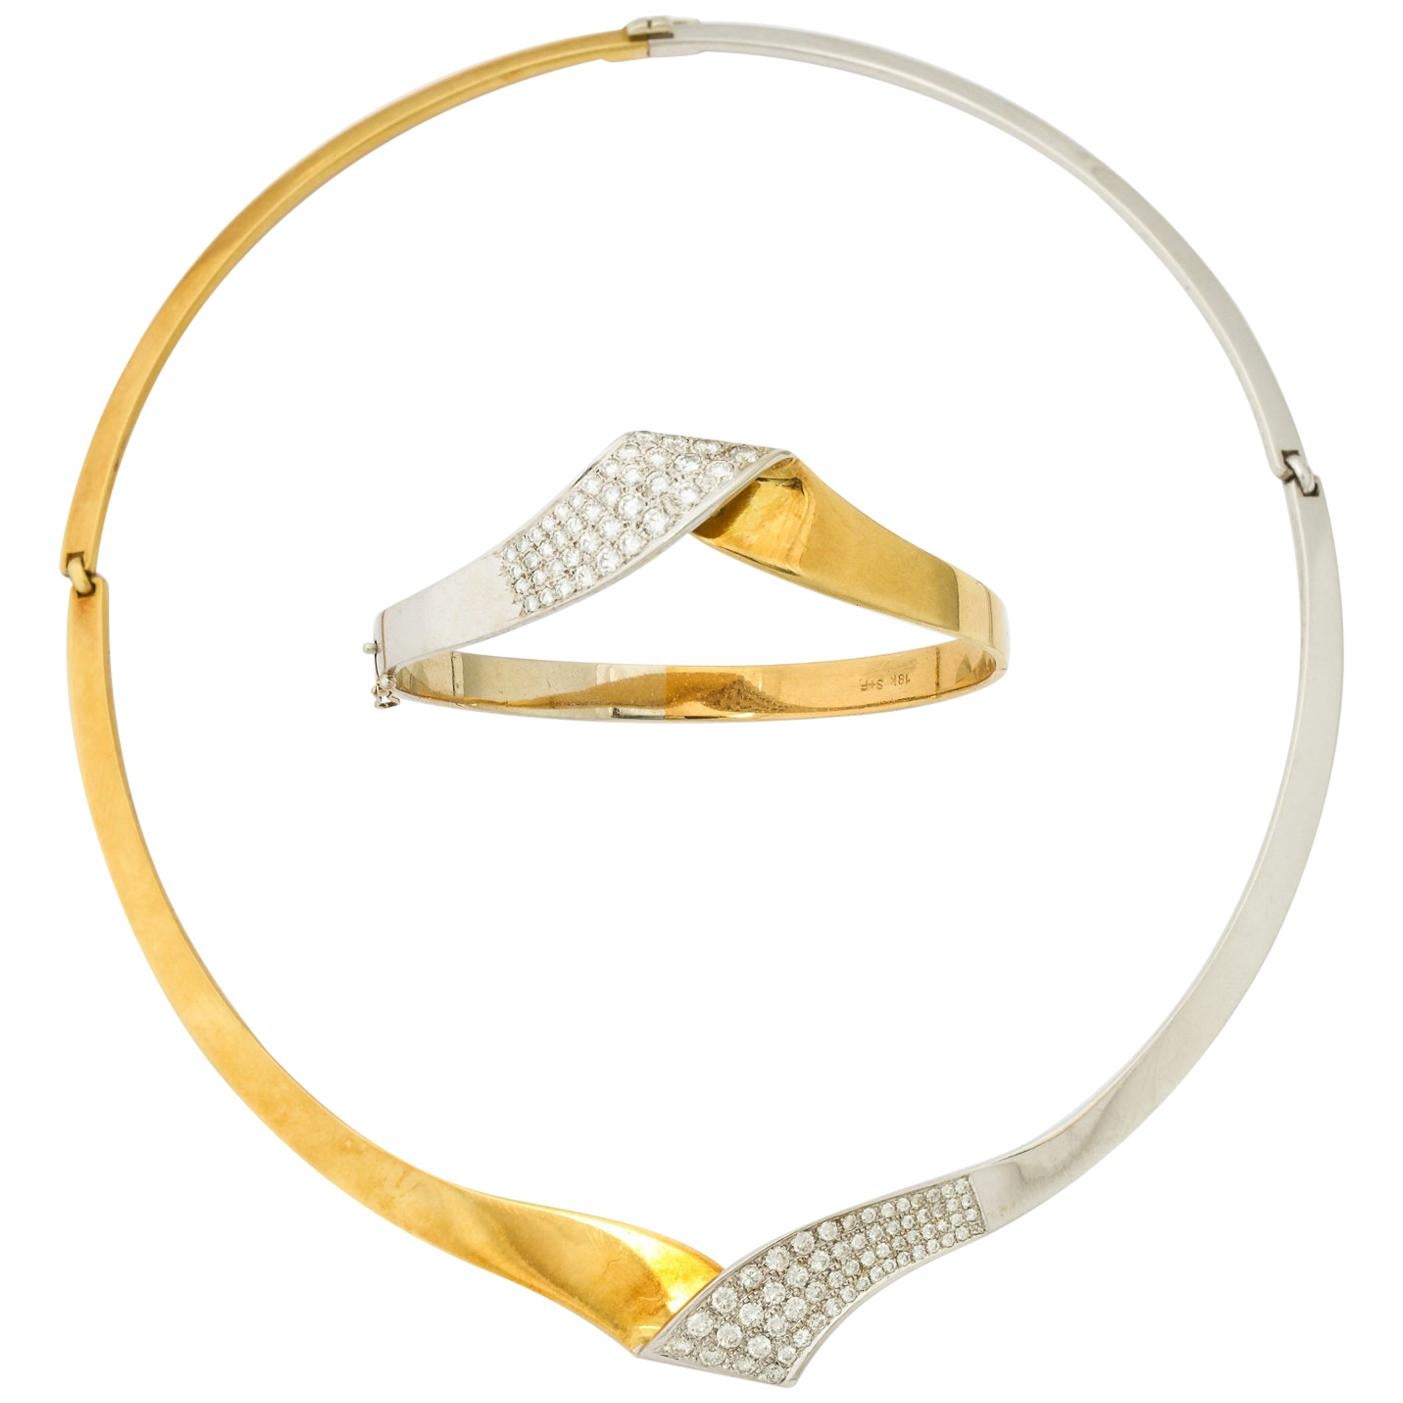 1980s Chic Diamond with White and Yellow Gold Bracelet/Necklace Combination Set